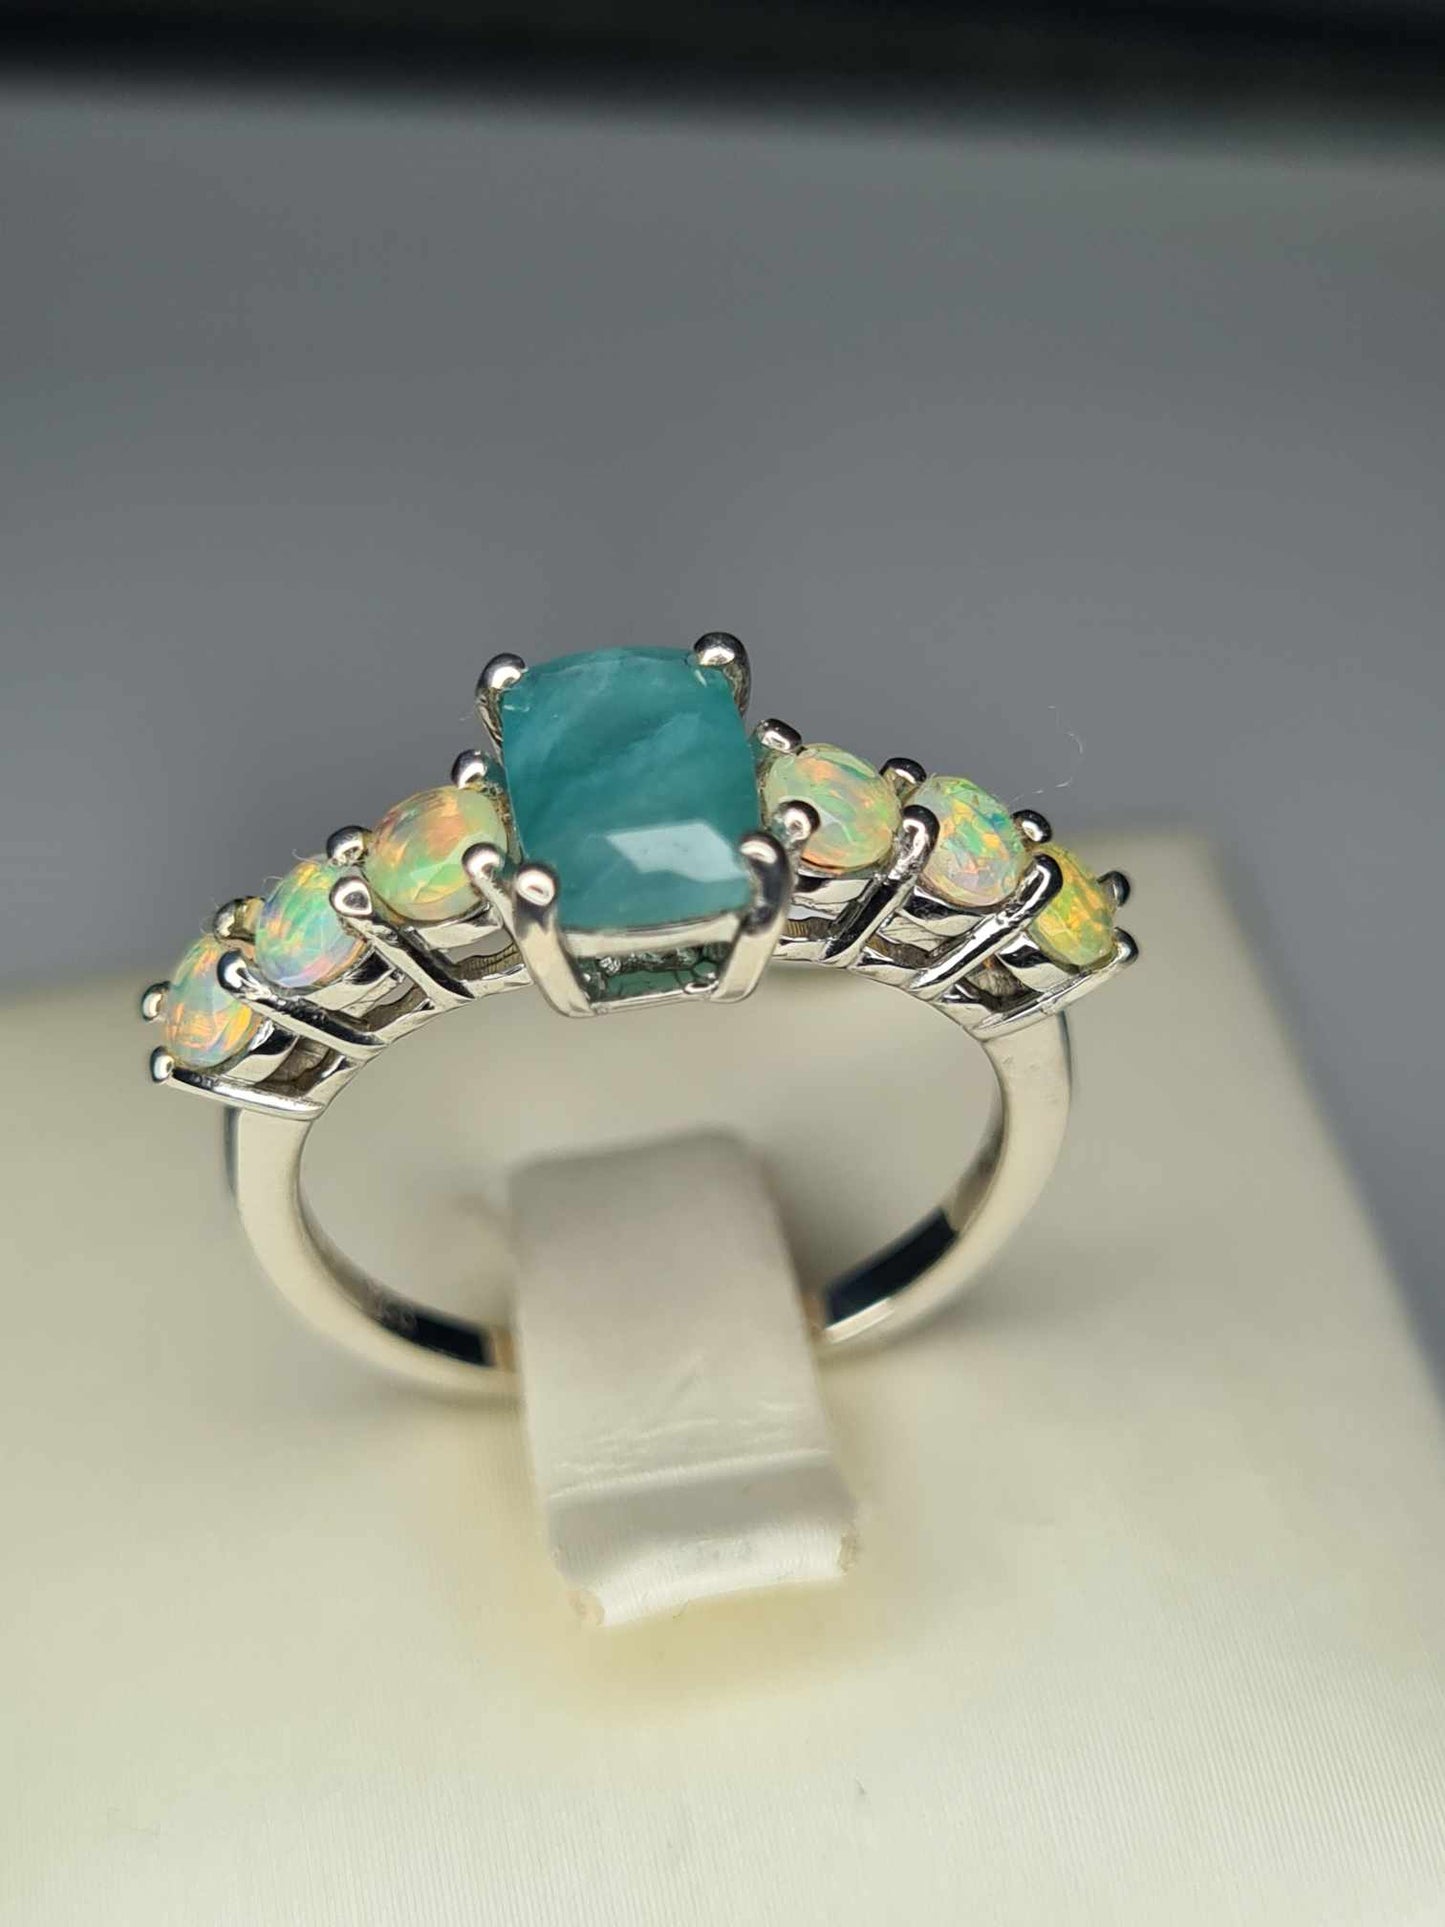 Grandidierite and Ethiopian Welo Opal 7 Stone Ring in Platinum Overlay Sterling Silver SIZES L,Q